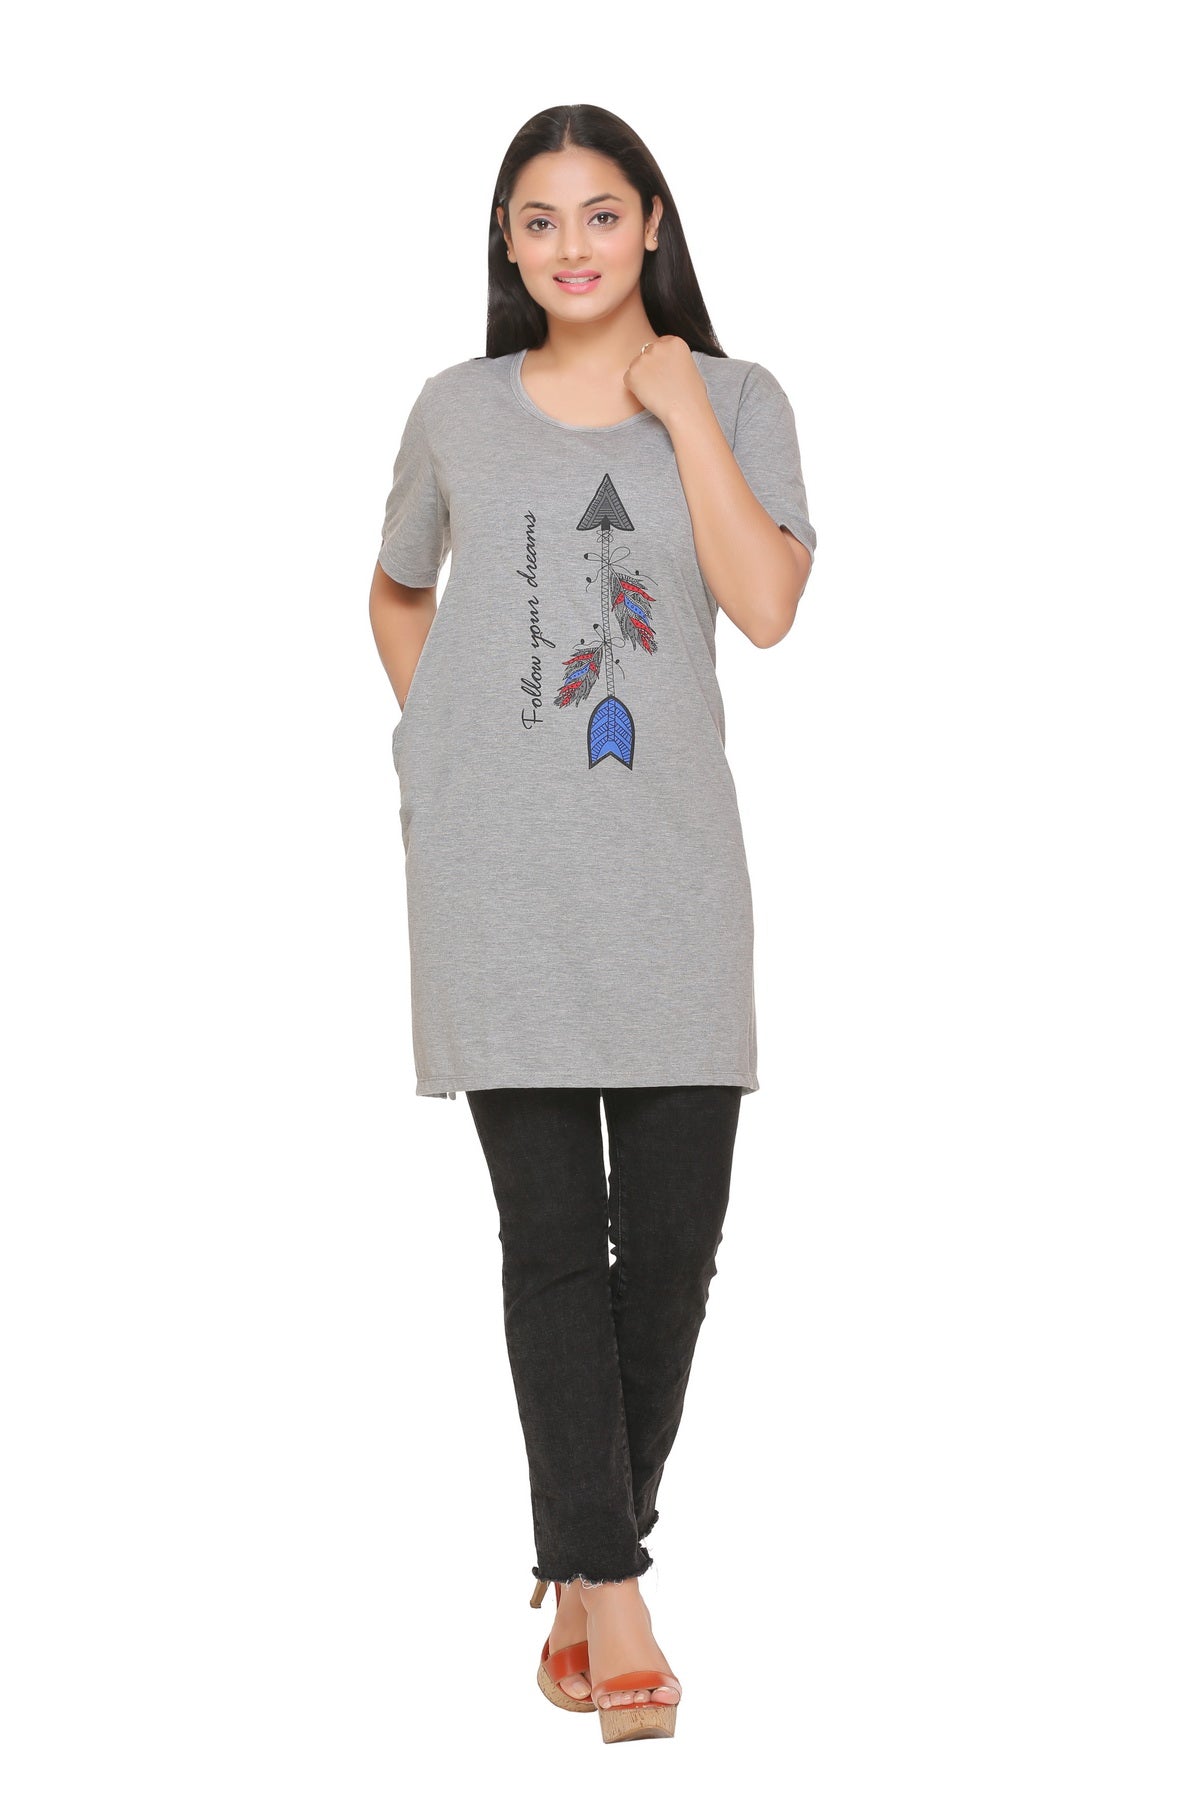 Plus Size Long T-shirts For Women - Half Sleeve - Pack of 2 (Grey & Black)